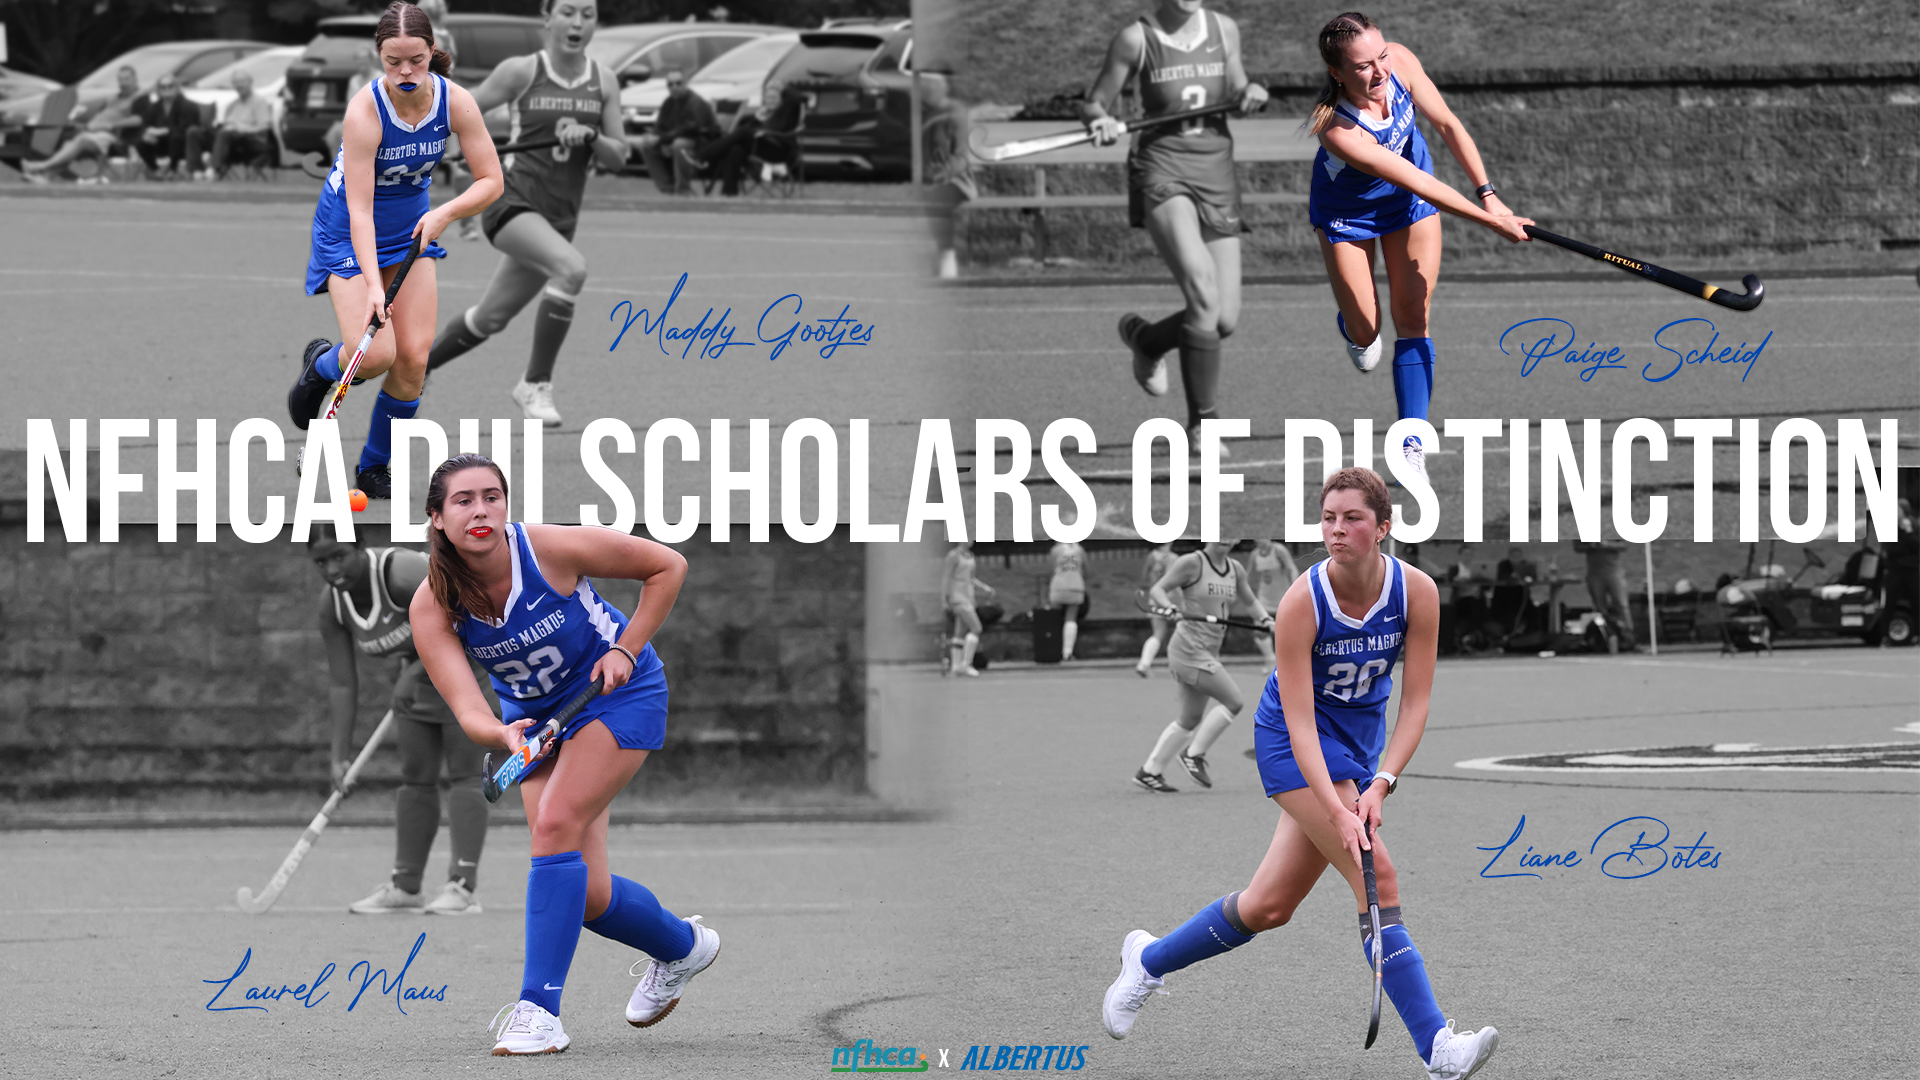 Four Falcons Honored as NFHCA DIII Scholars of Distinction